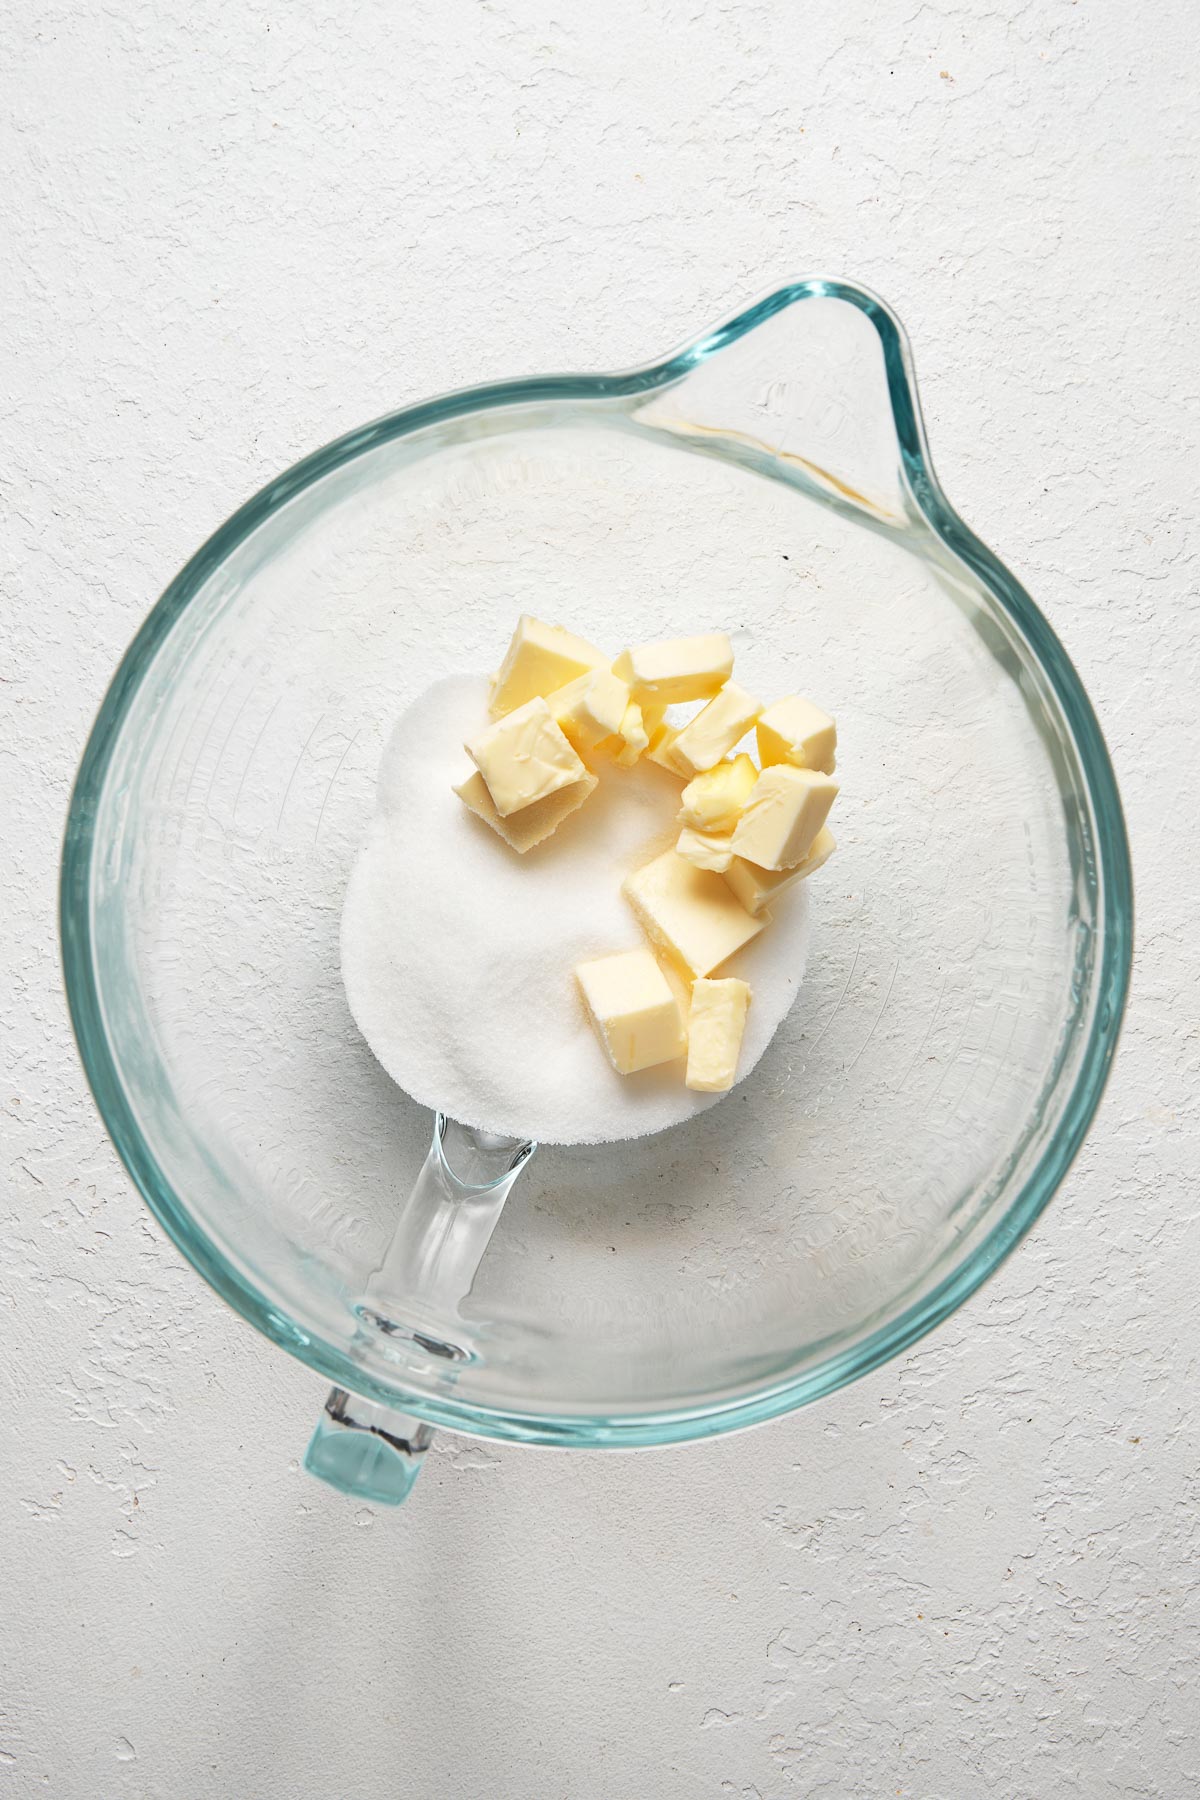 Top view of glass mixing bowl with butter and sugar in it.